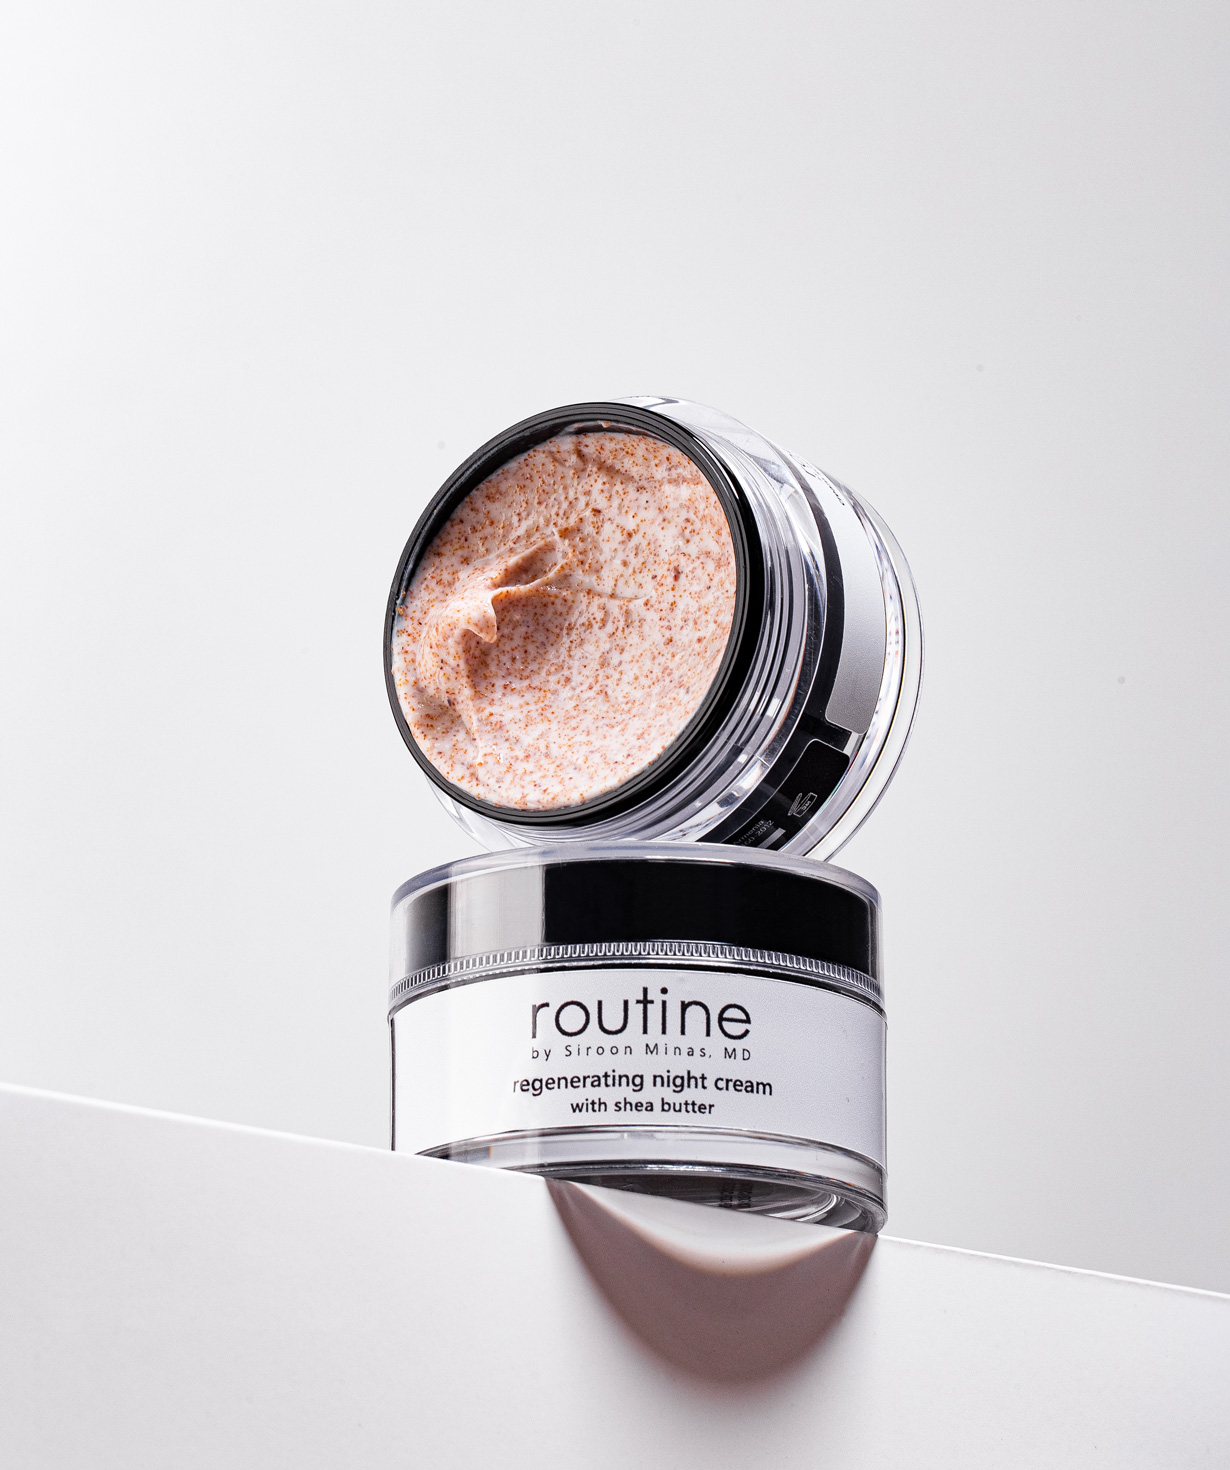 Regenerating night cream «Routine» with shea butter, 50 ml